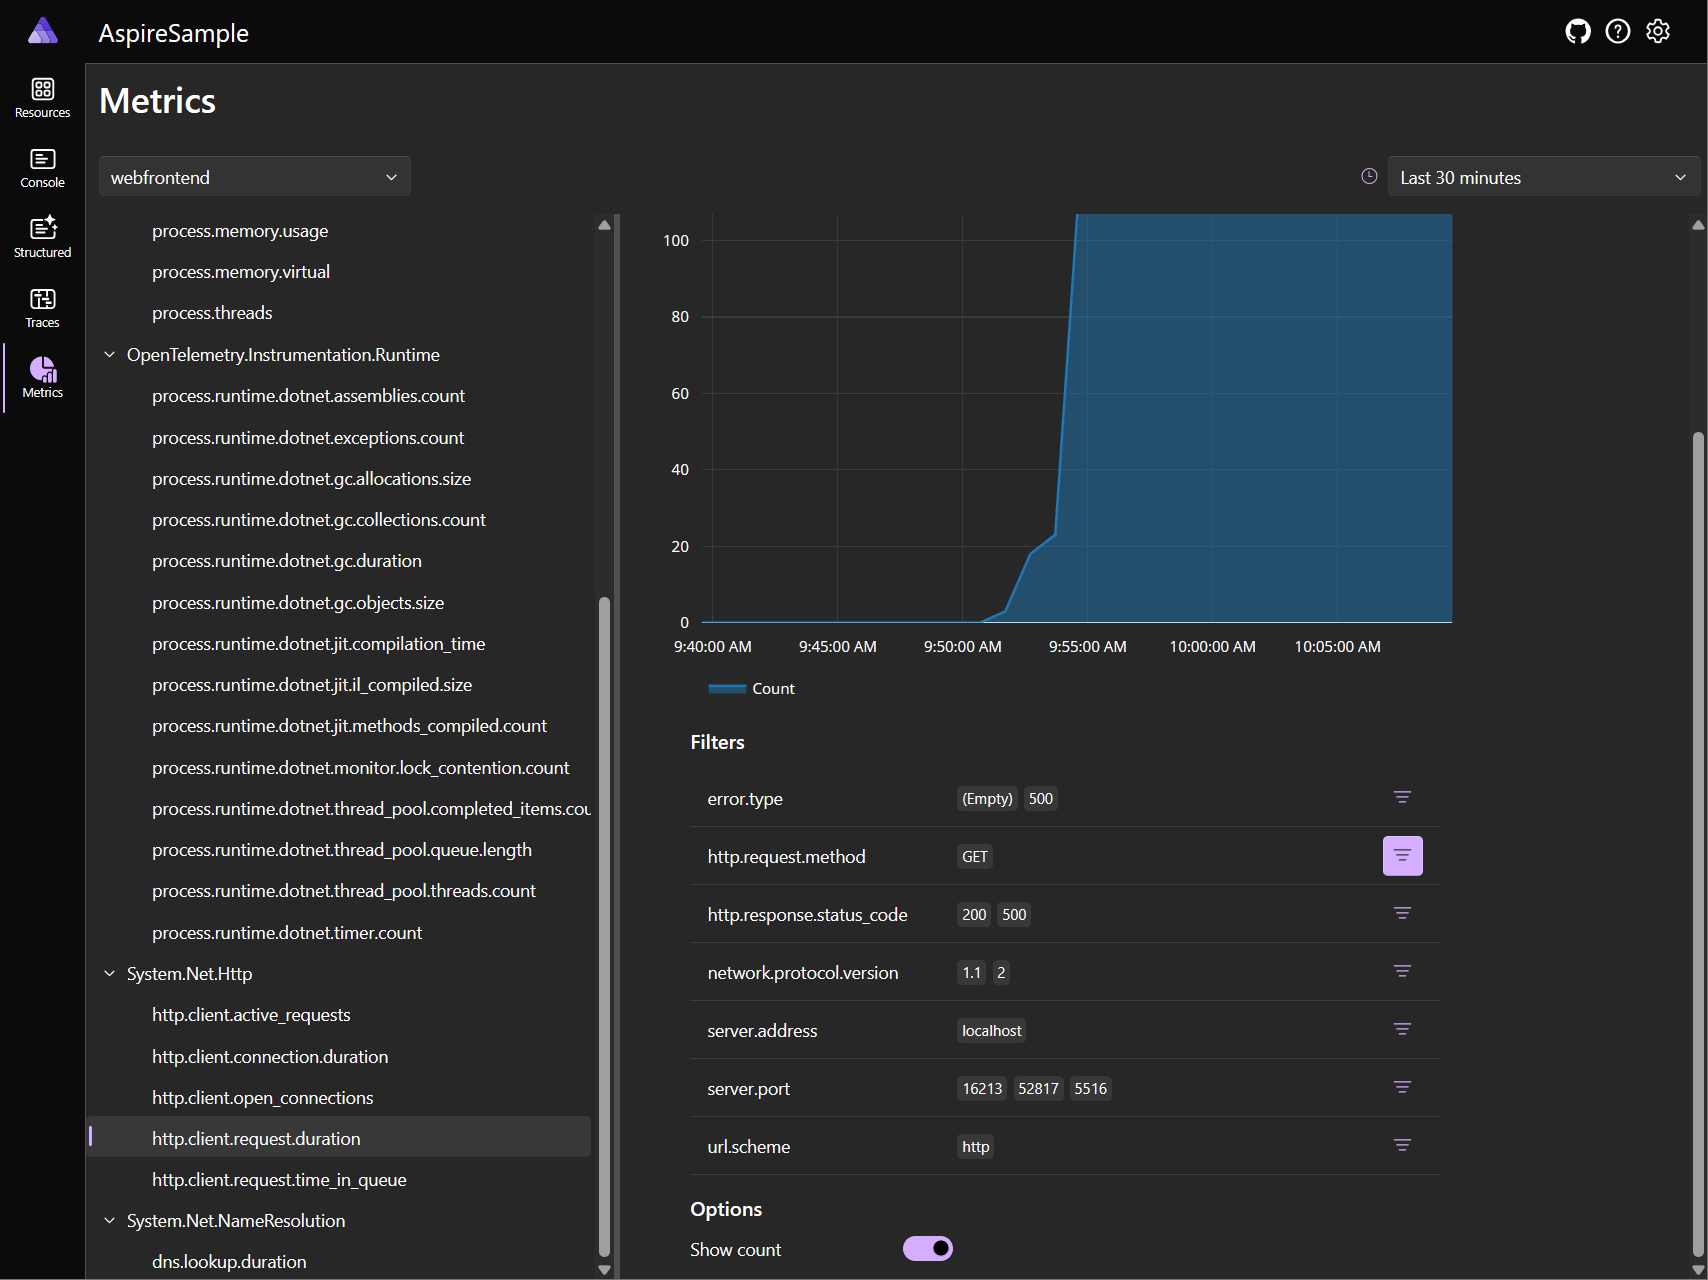 A screenshot of the .NET Aspire dashboard Metrics page with the count option applied.